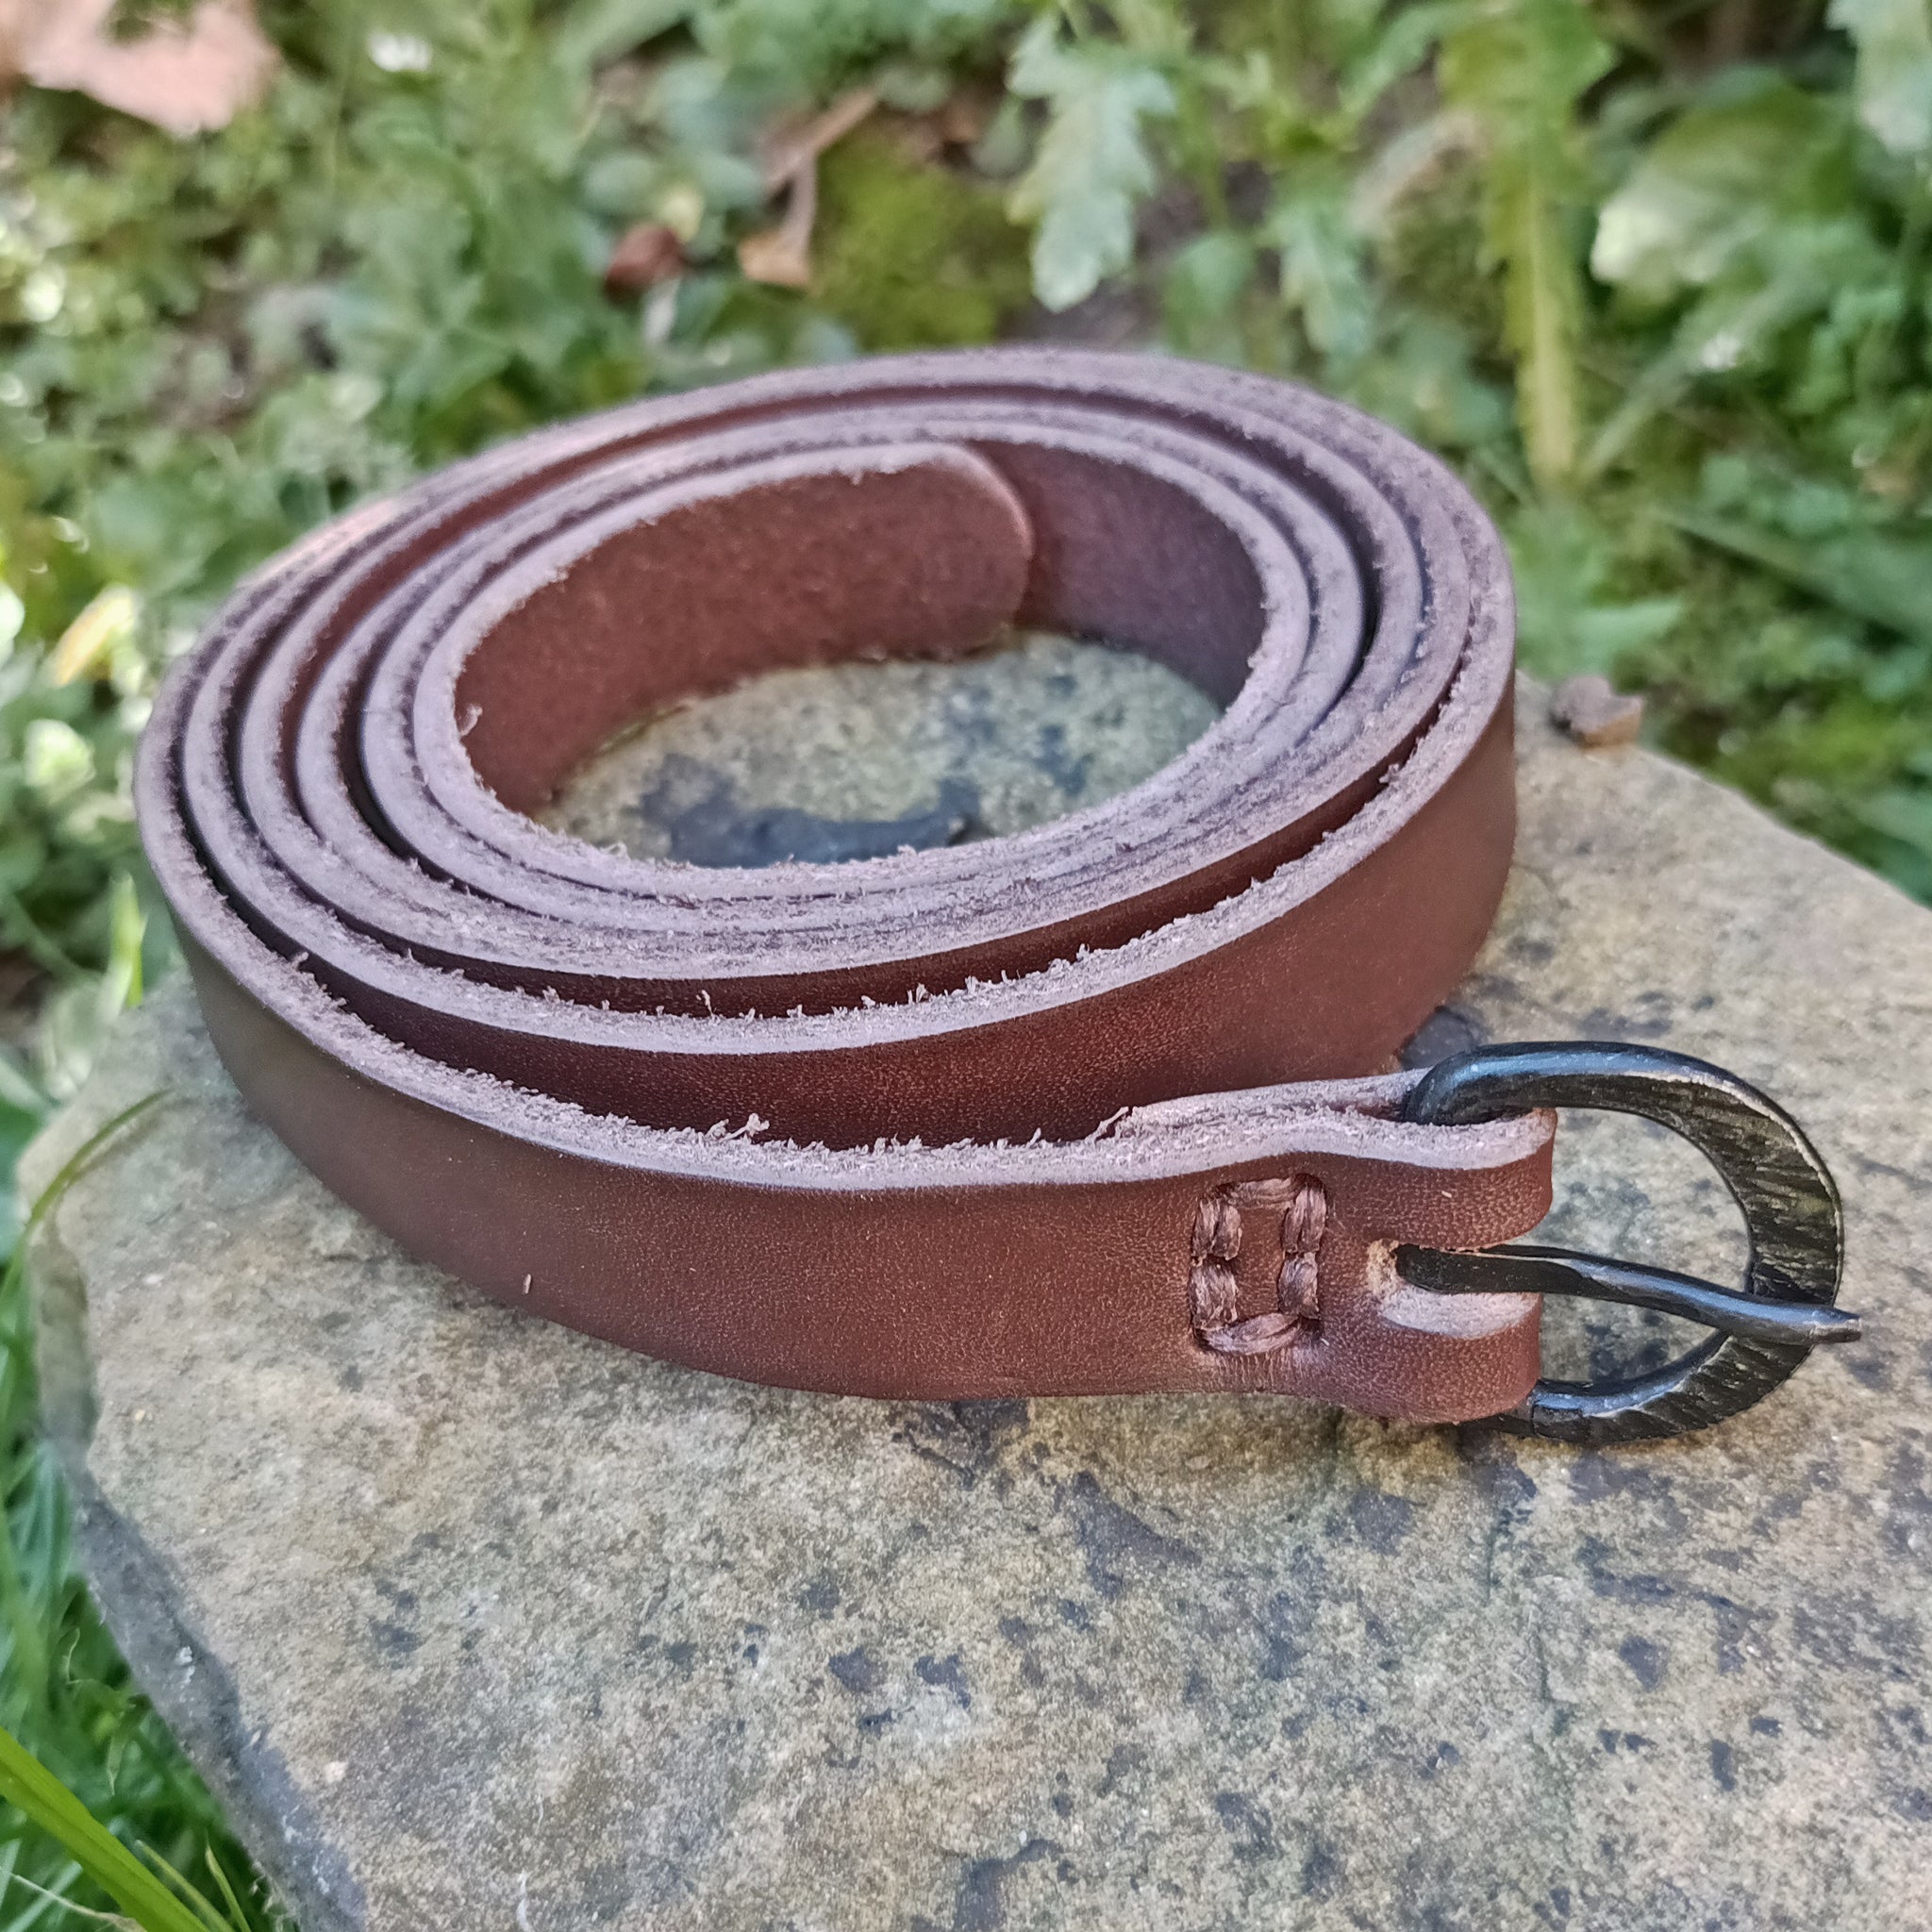 Long Viking / Medieval Belt with Hand-Forged Iron Buckle - 20mm (0.75 inch) Width on Rock